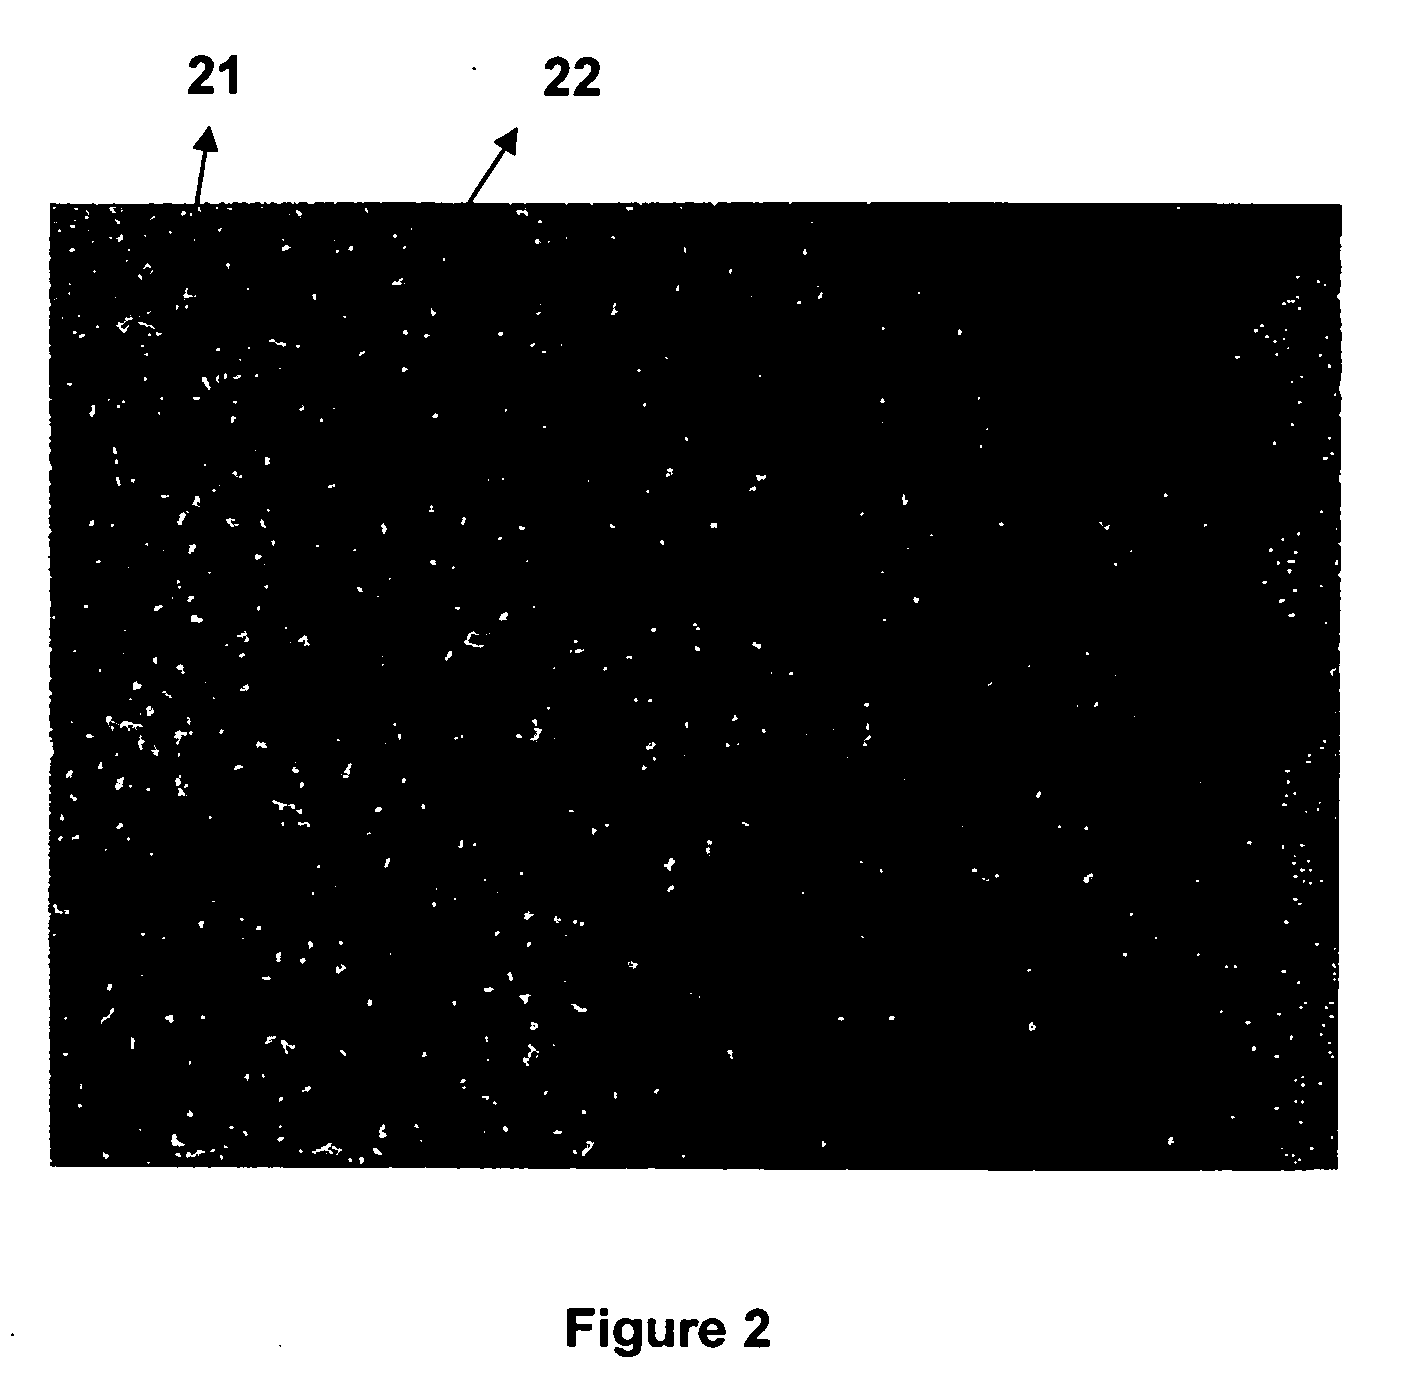 Biocompatible cemented carbide articles and methods of making the same